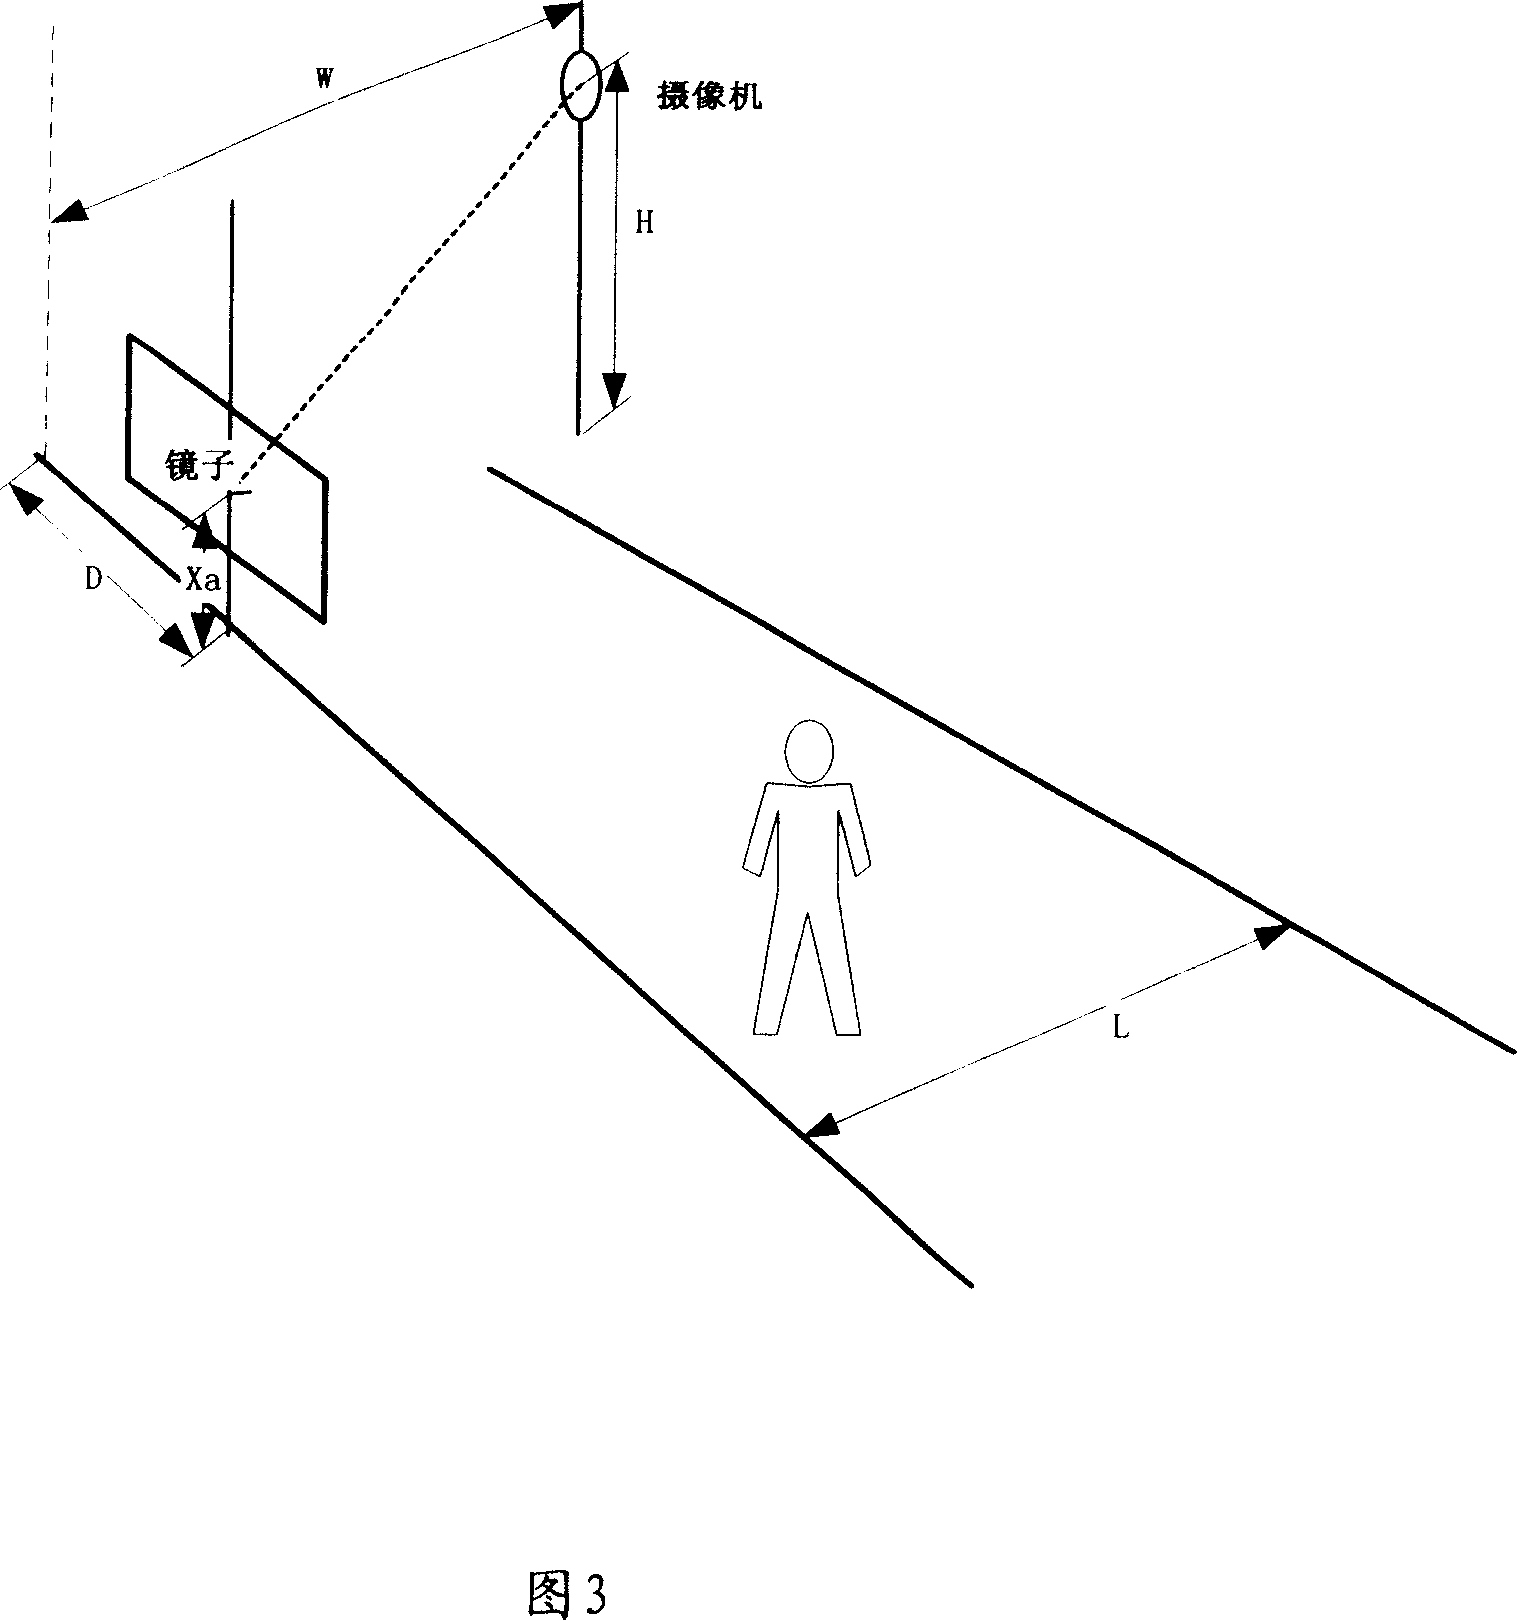 Image collecting method and its application